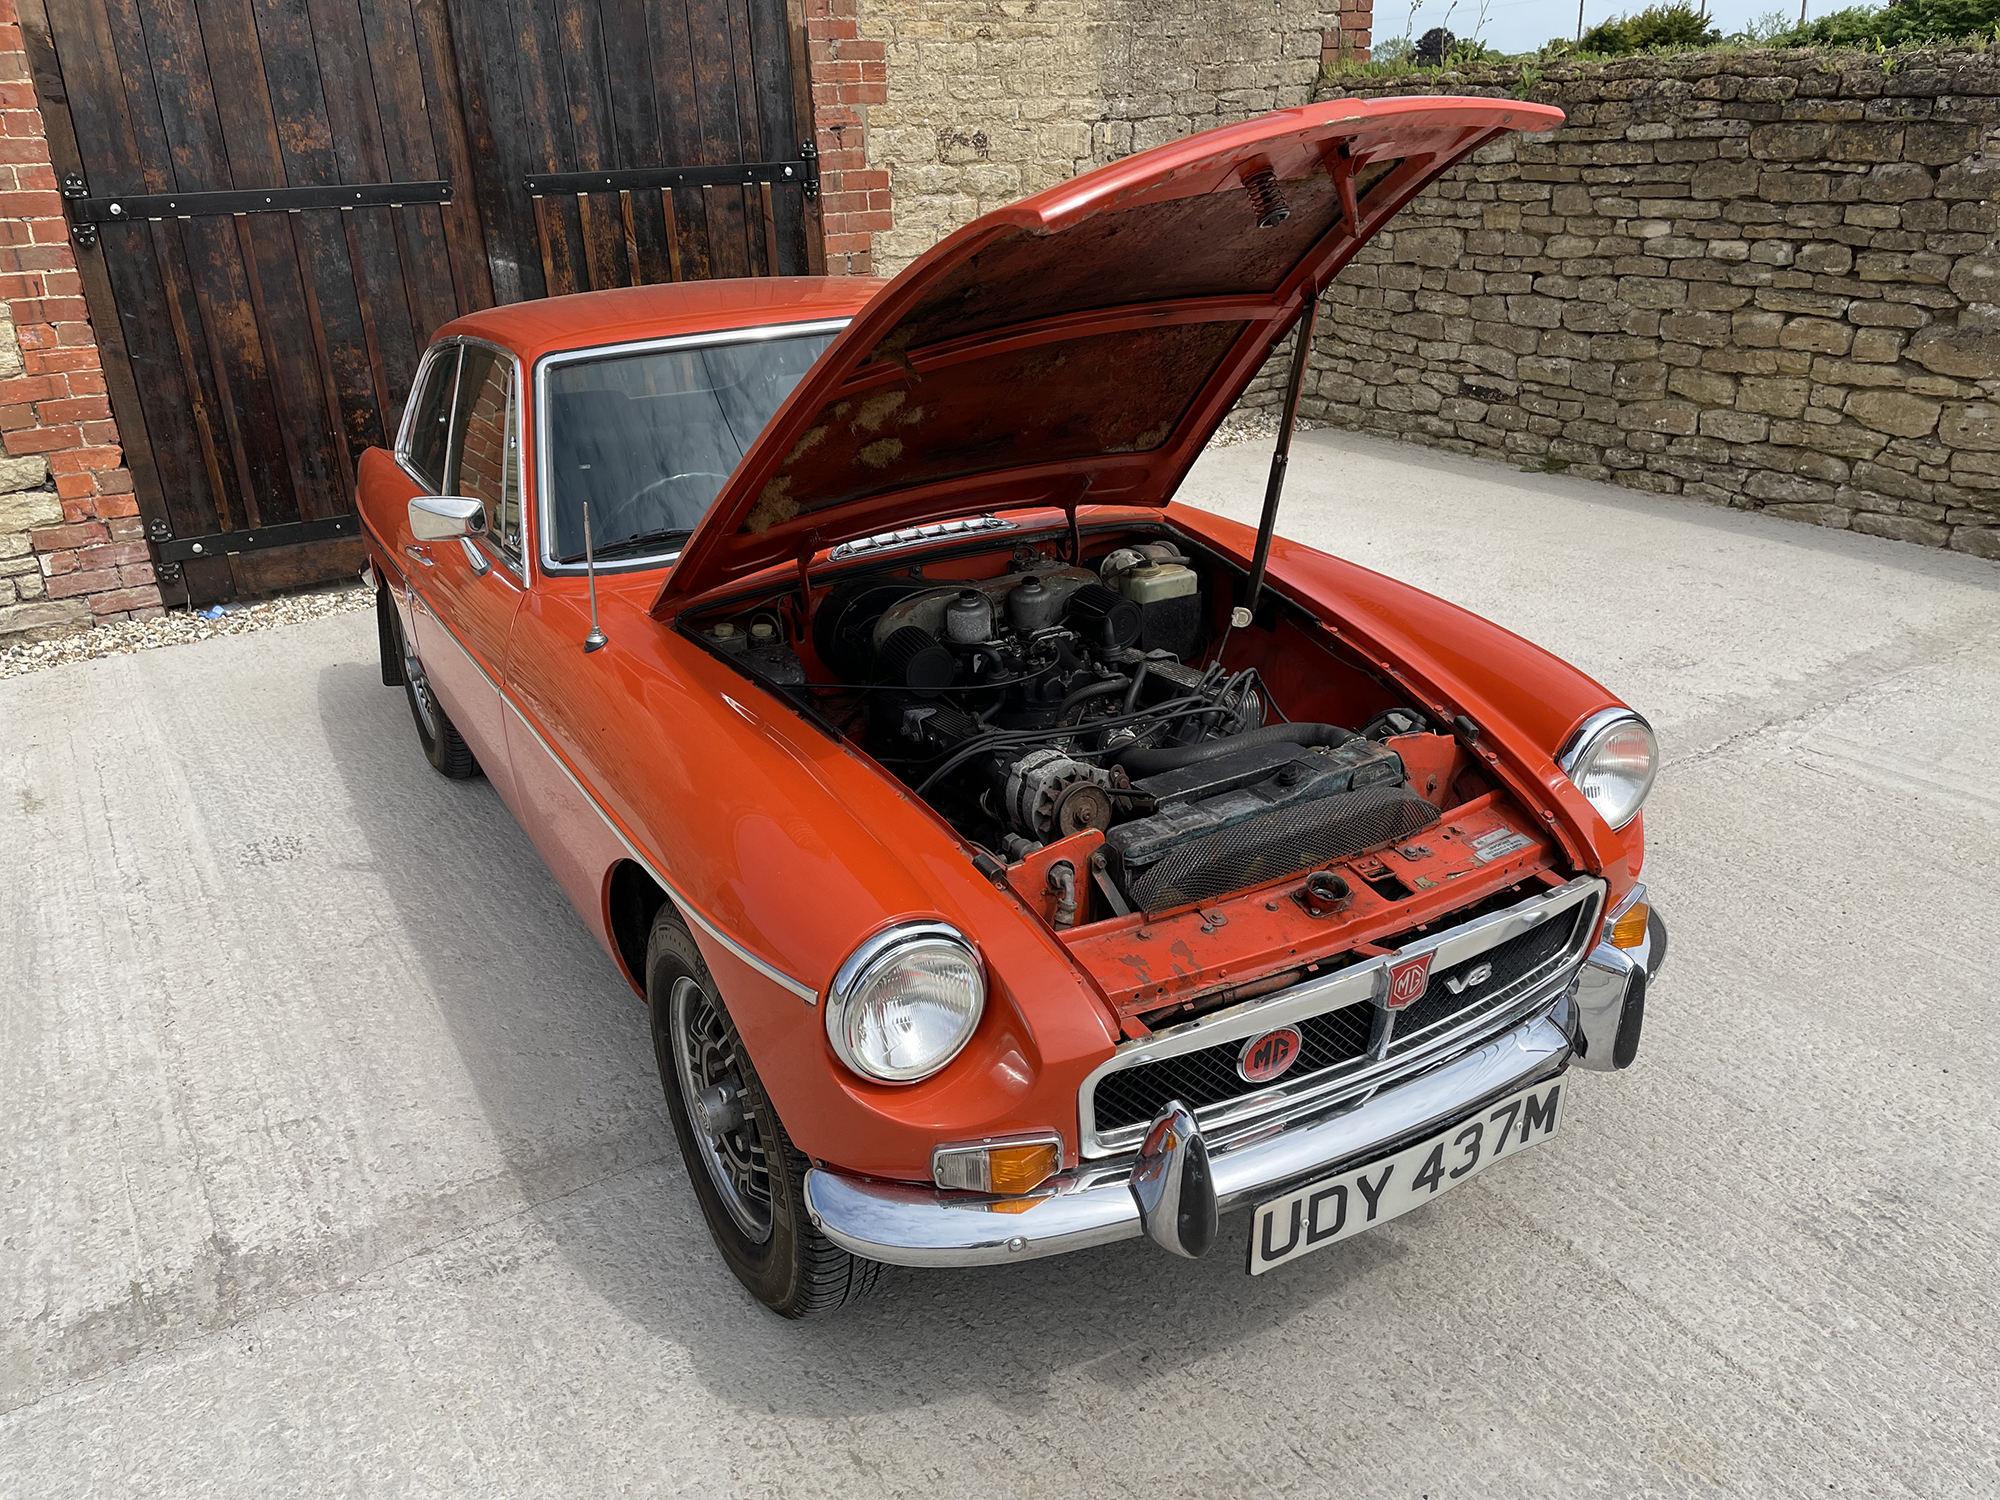 1973 MGB GT V8 Reg. no. UDY 437M Chassis no. GD2D1125G Engine no. 8600023 - Image 12 of 16